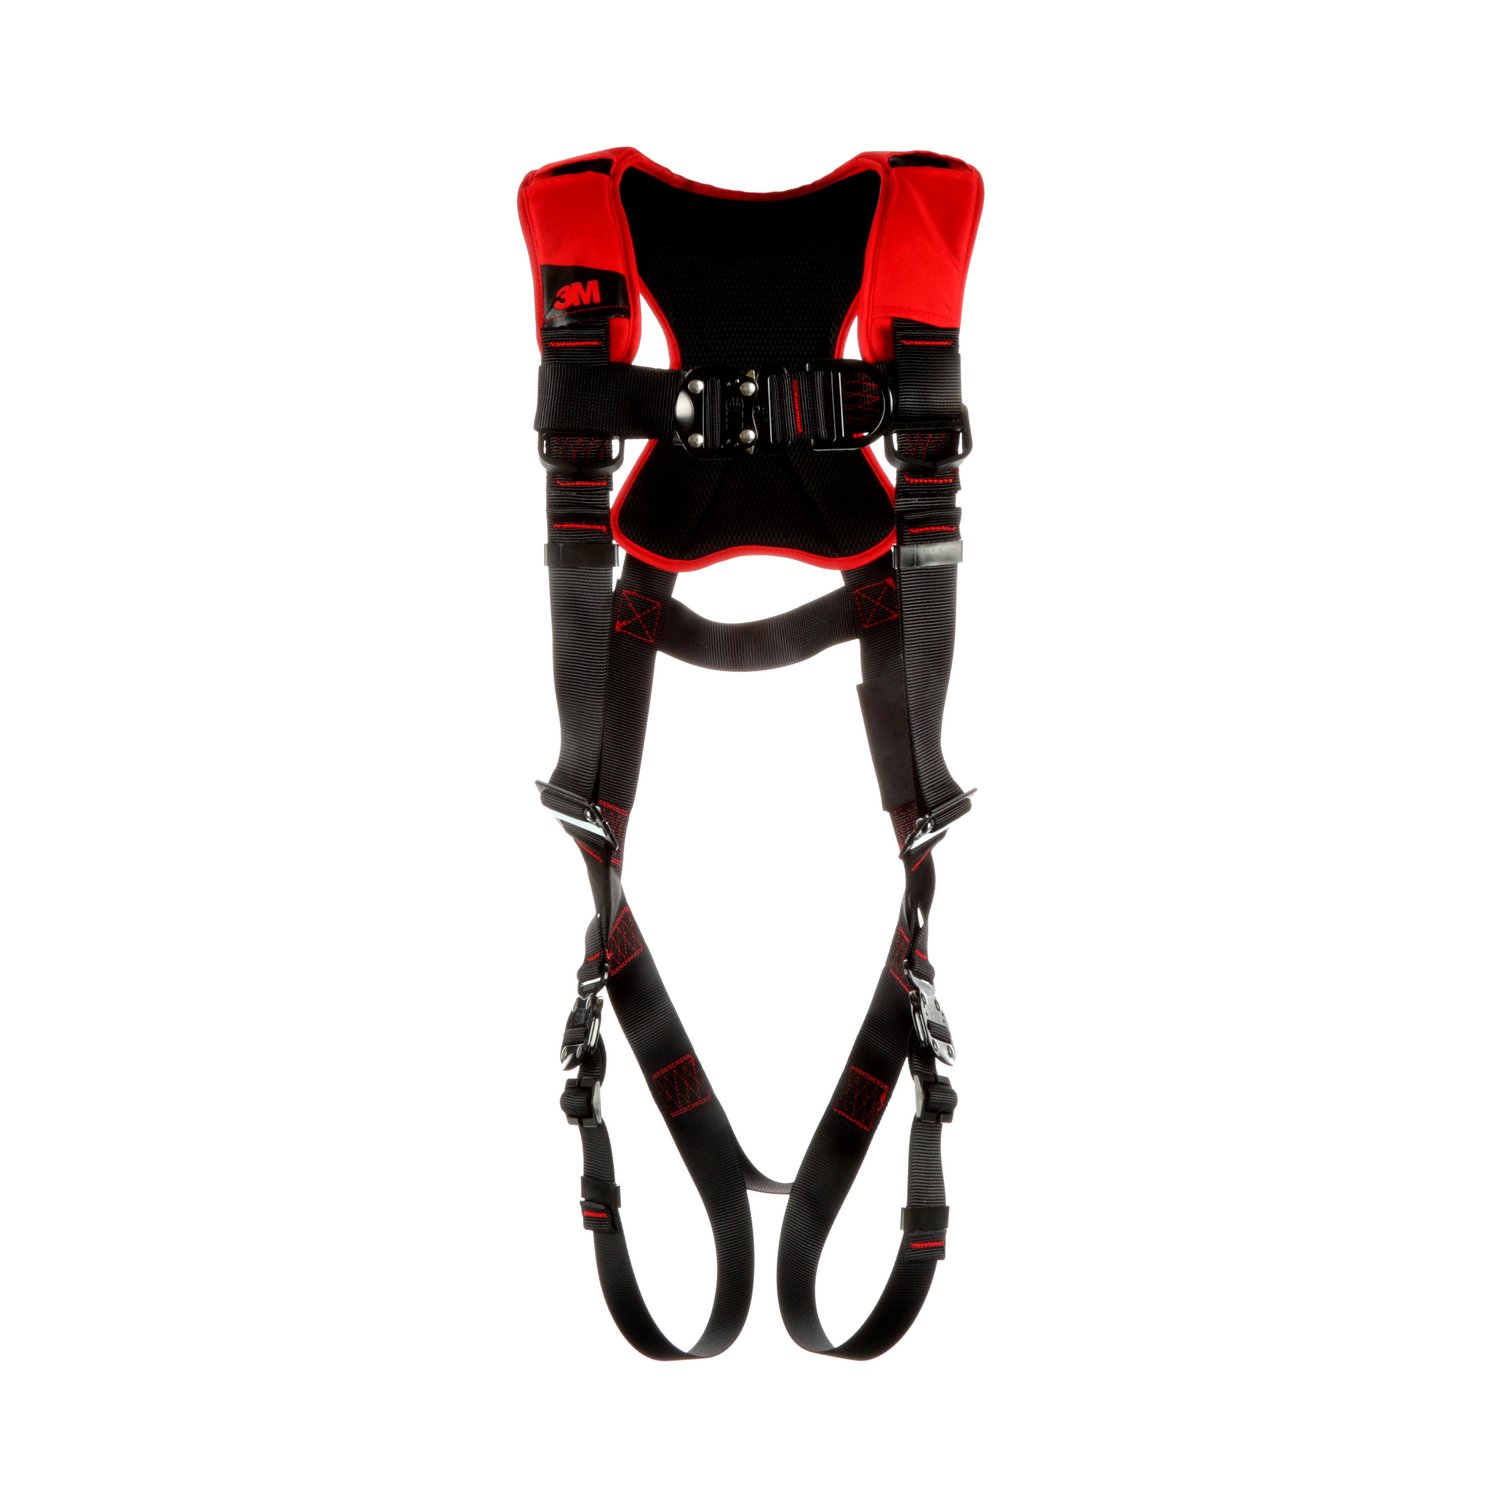 7012816675 - 3M Protecta P200 Comfort Vest Climbing Safety Harness 1161406, X-Large